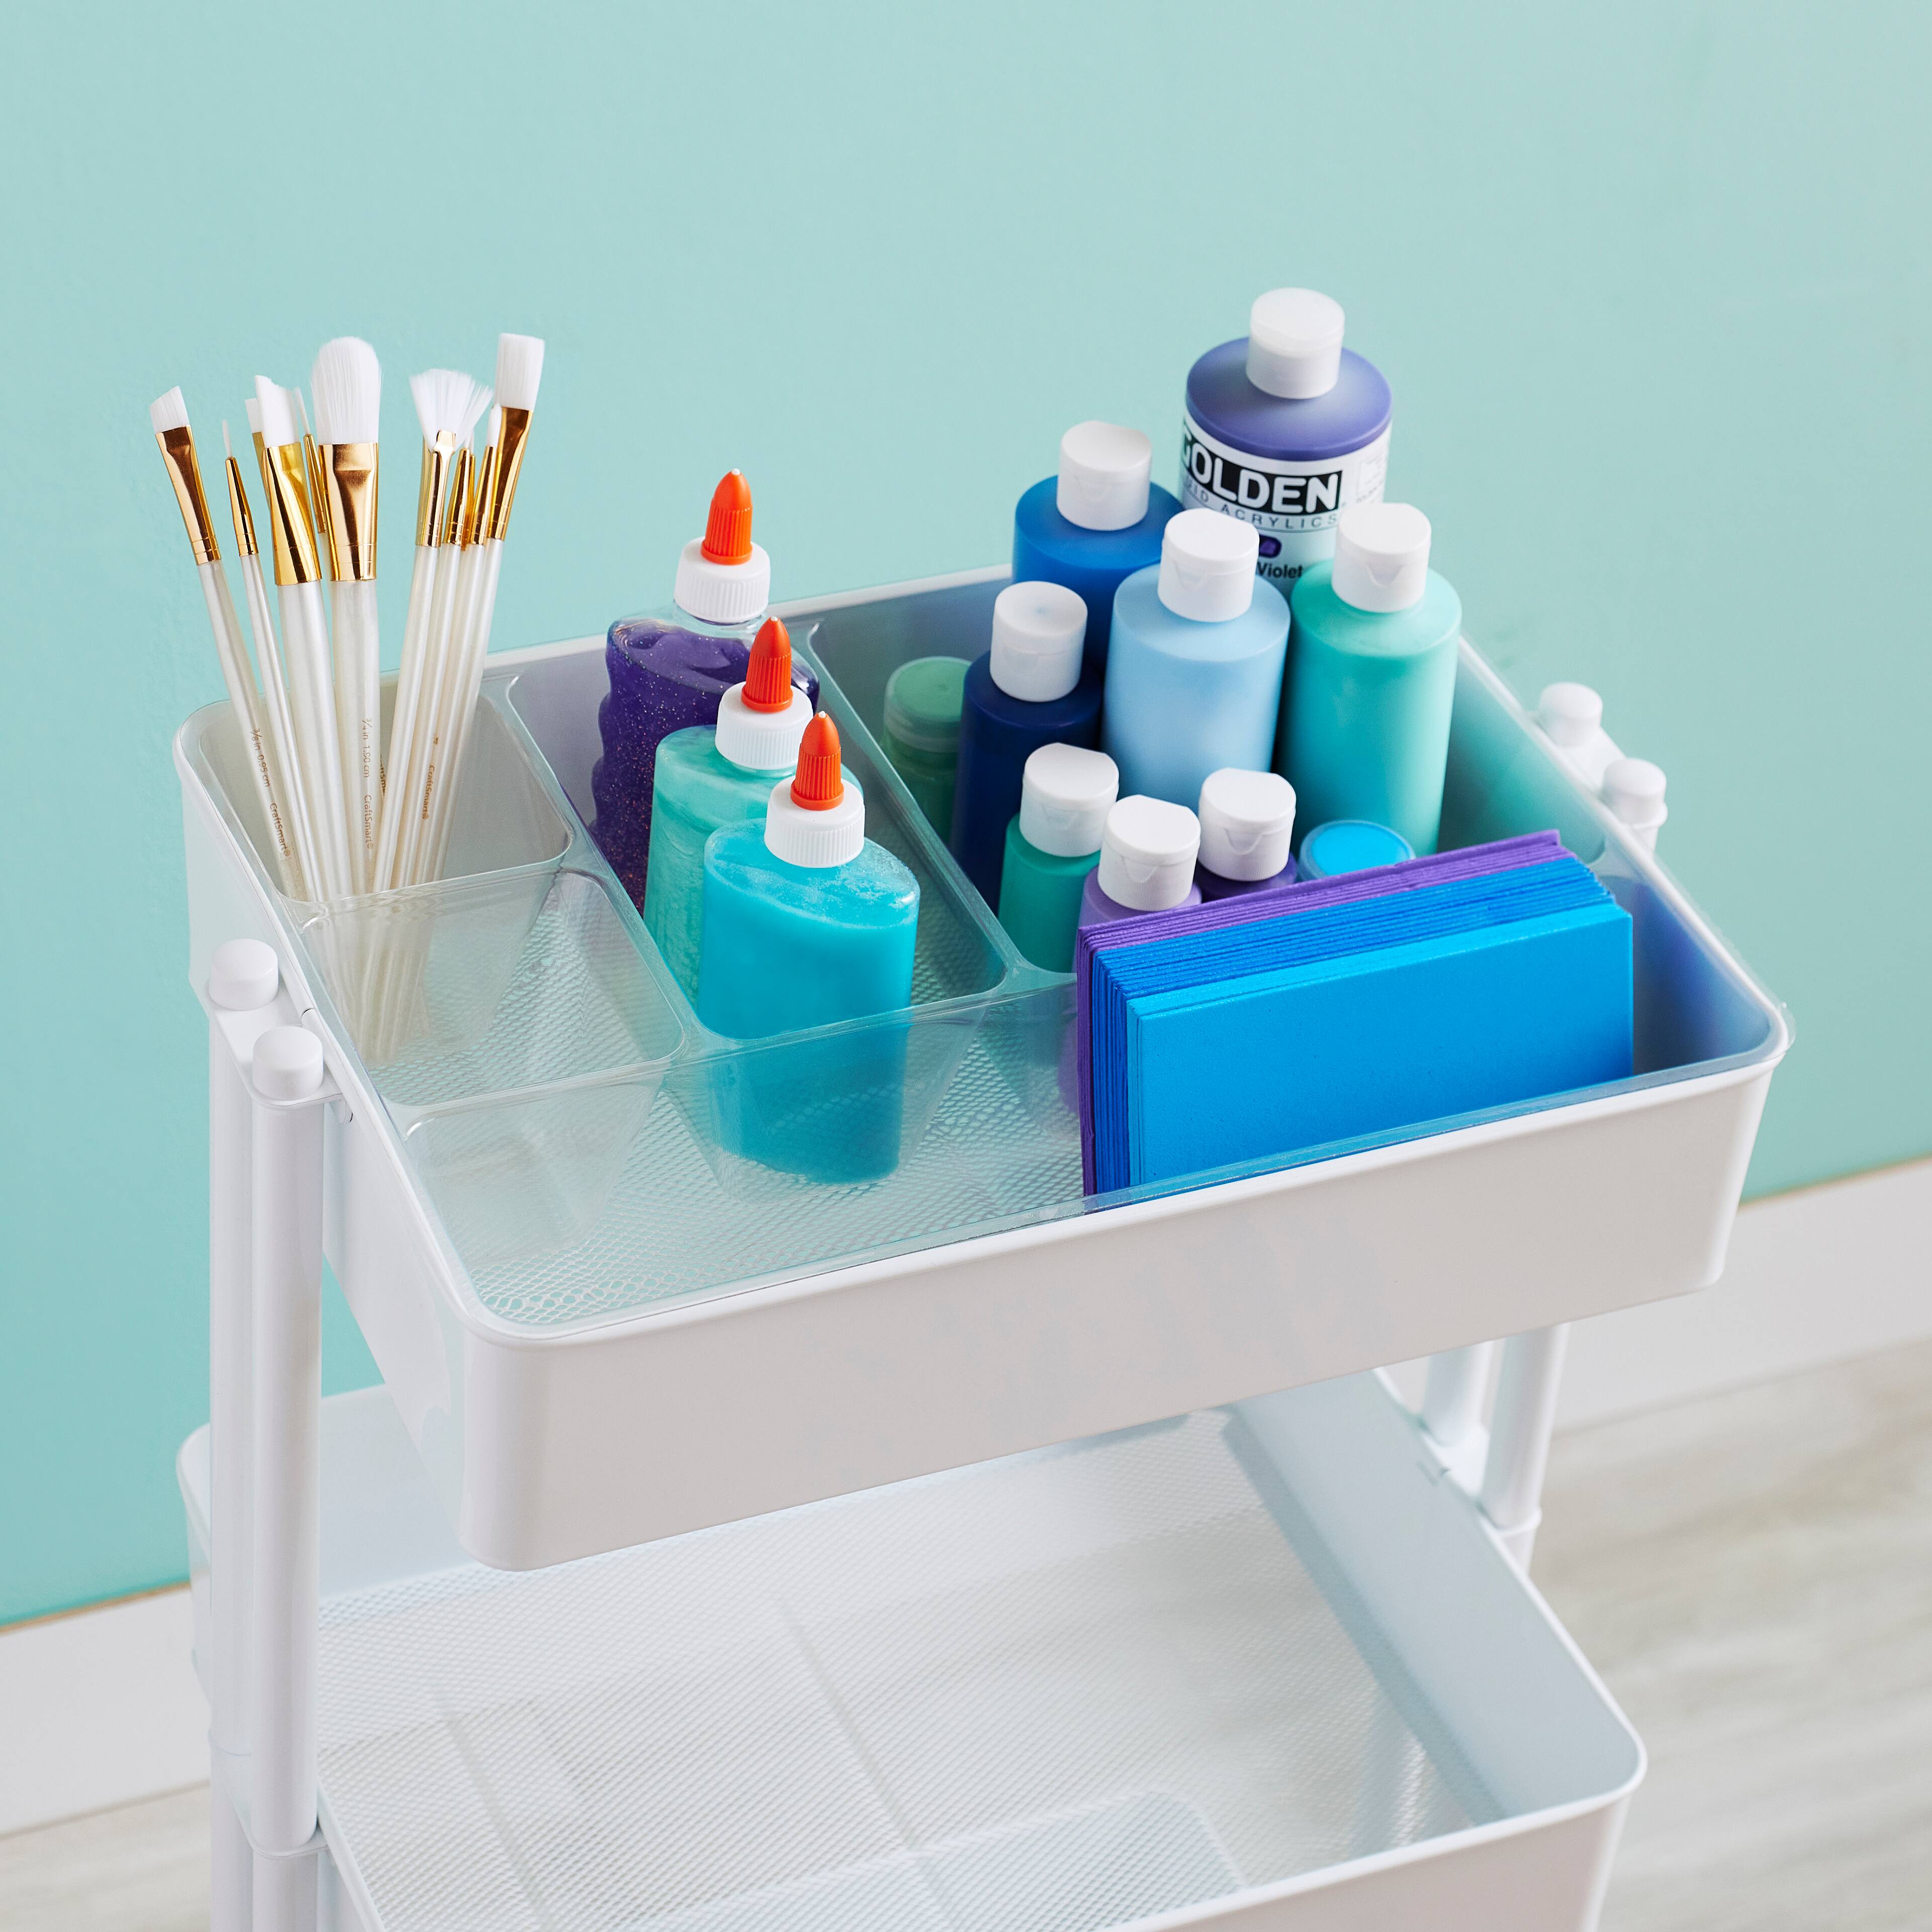 Eleven 3-tier cart ideas to keep you organized